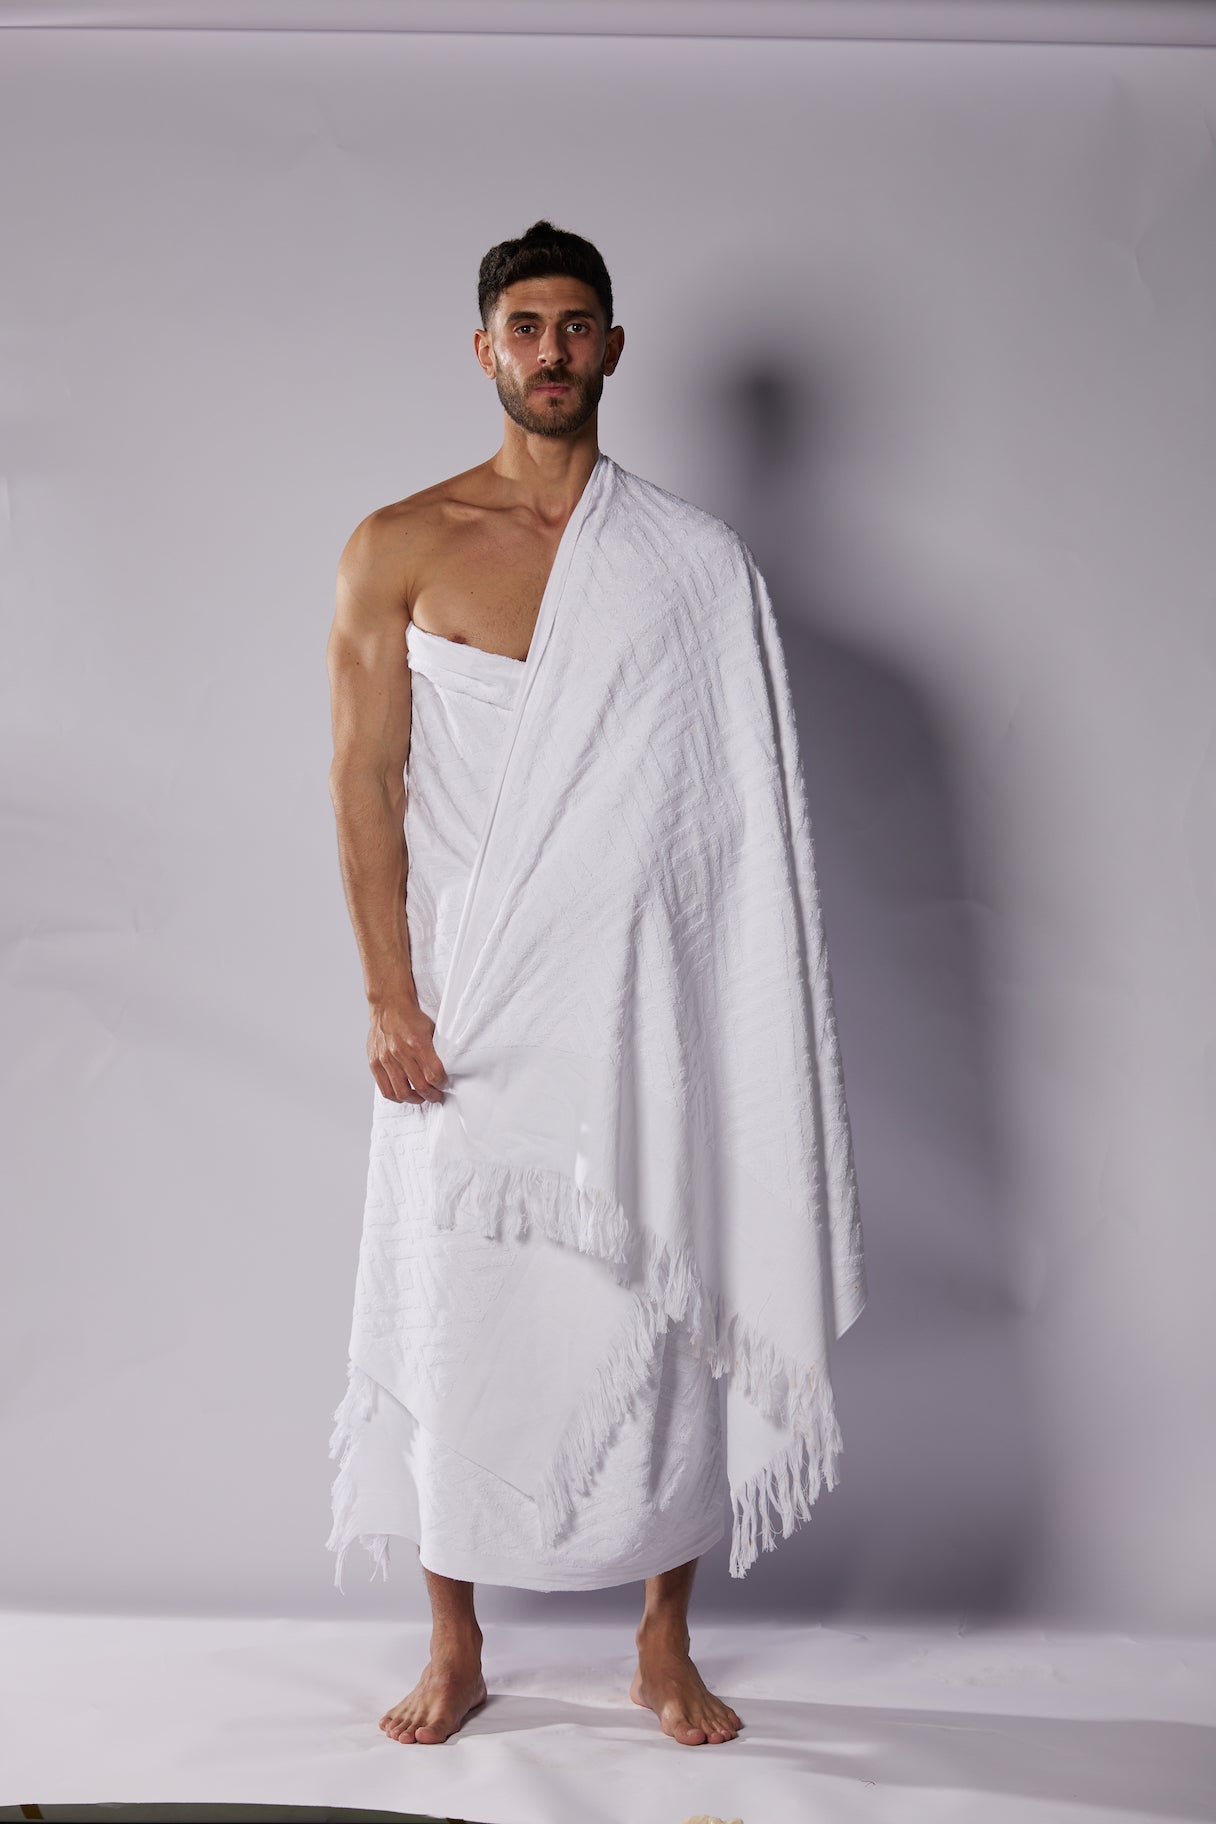 Patterned  Ihram Set (Without Plungers)